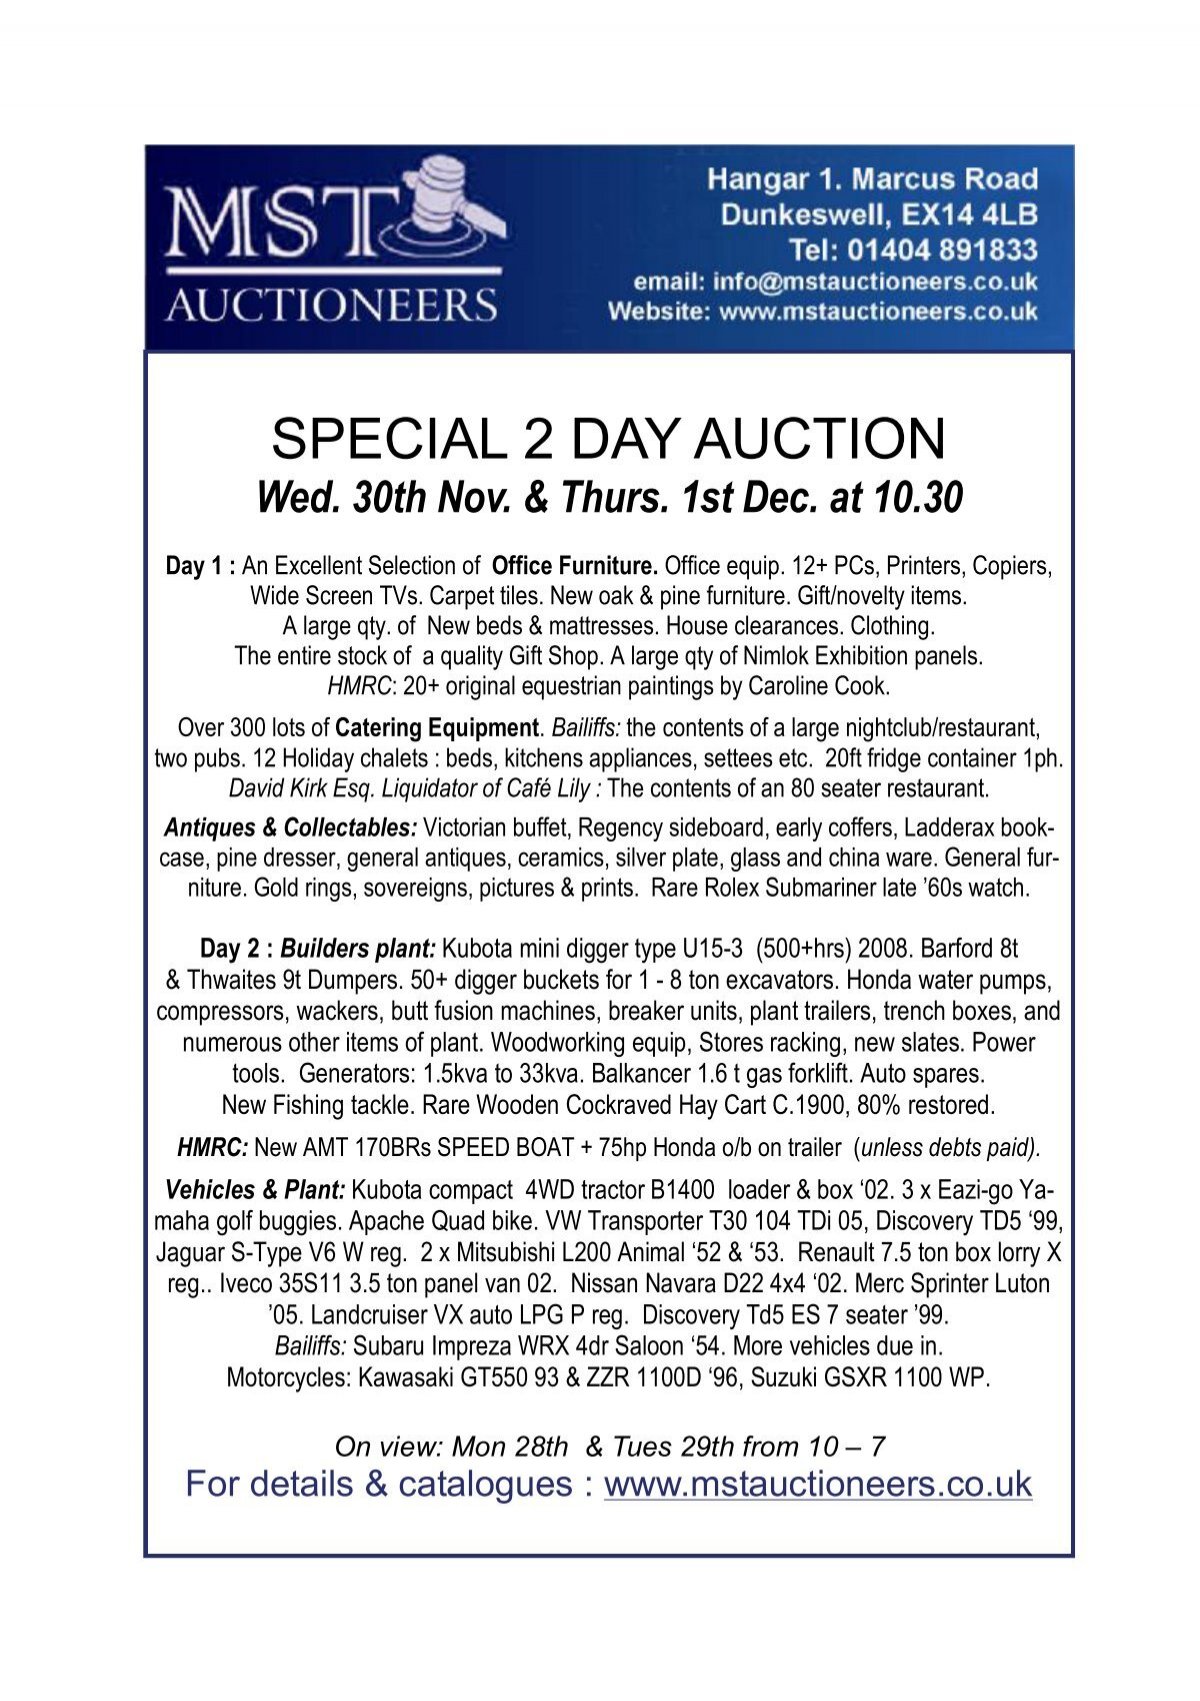 Cat Cover 30th nov 1st Dec 2011 - MST Commercial Auctioneers